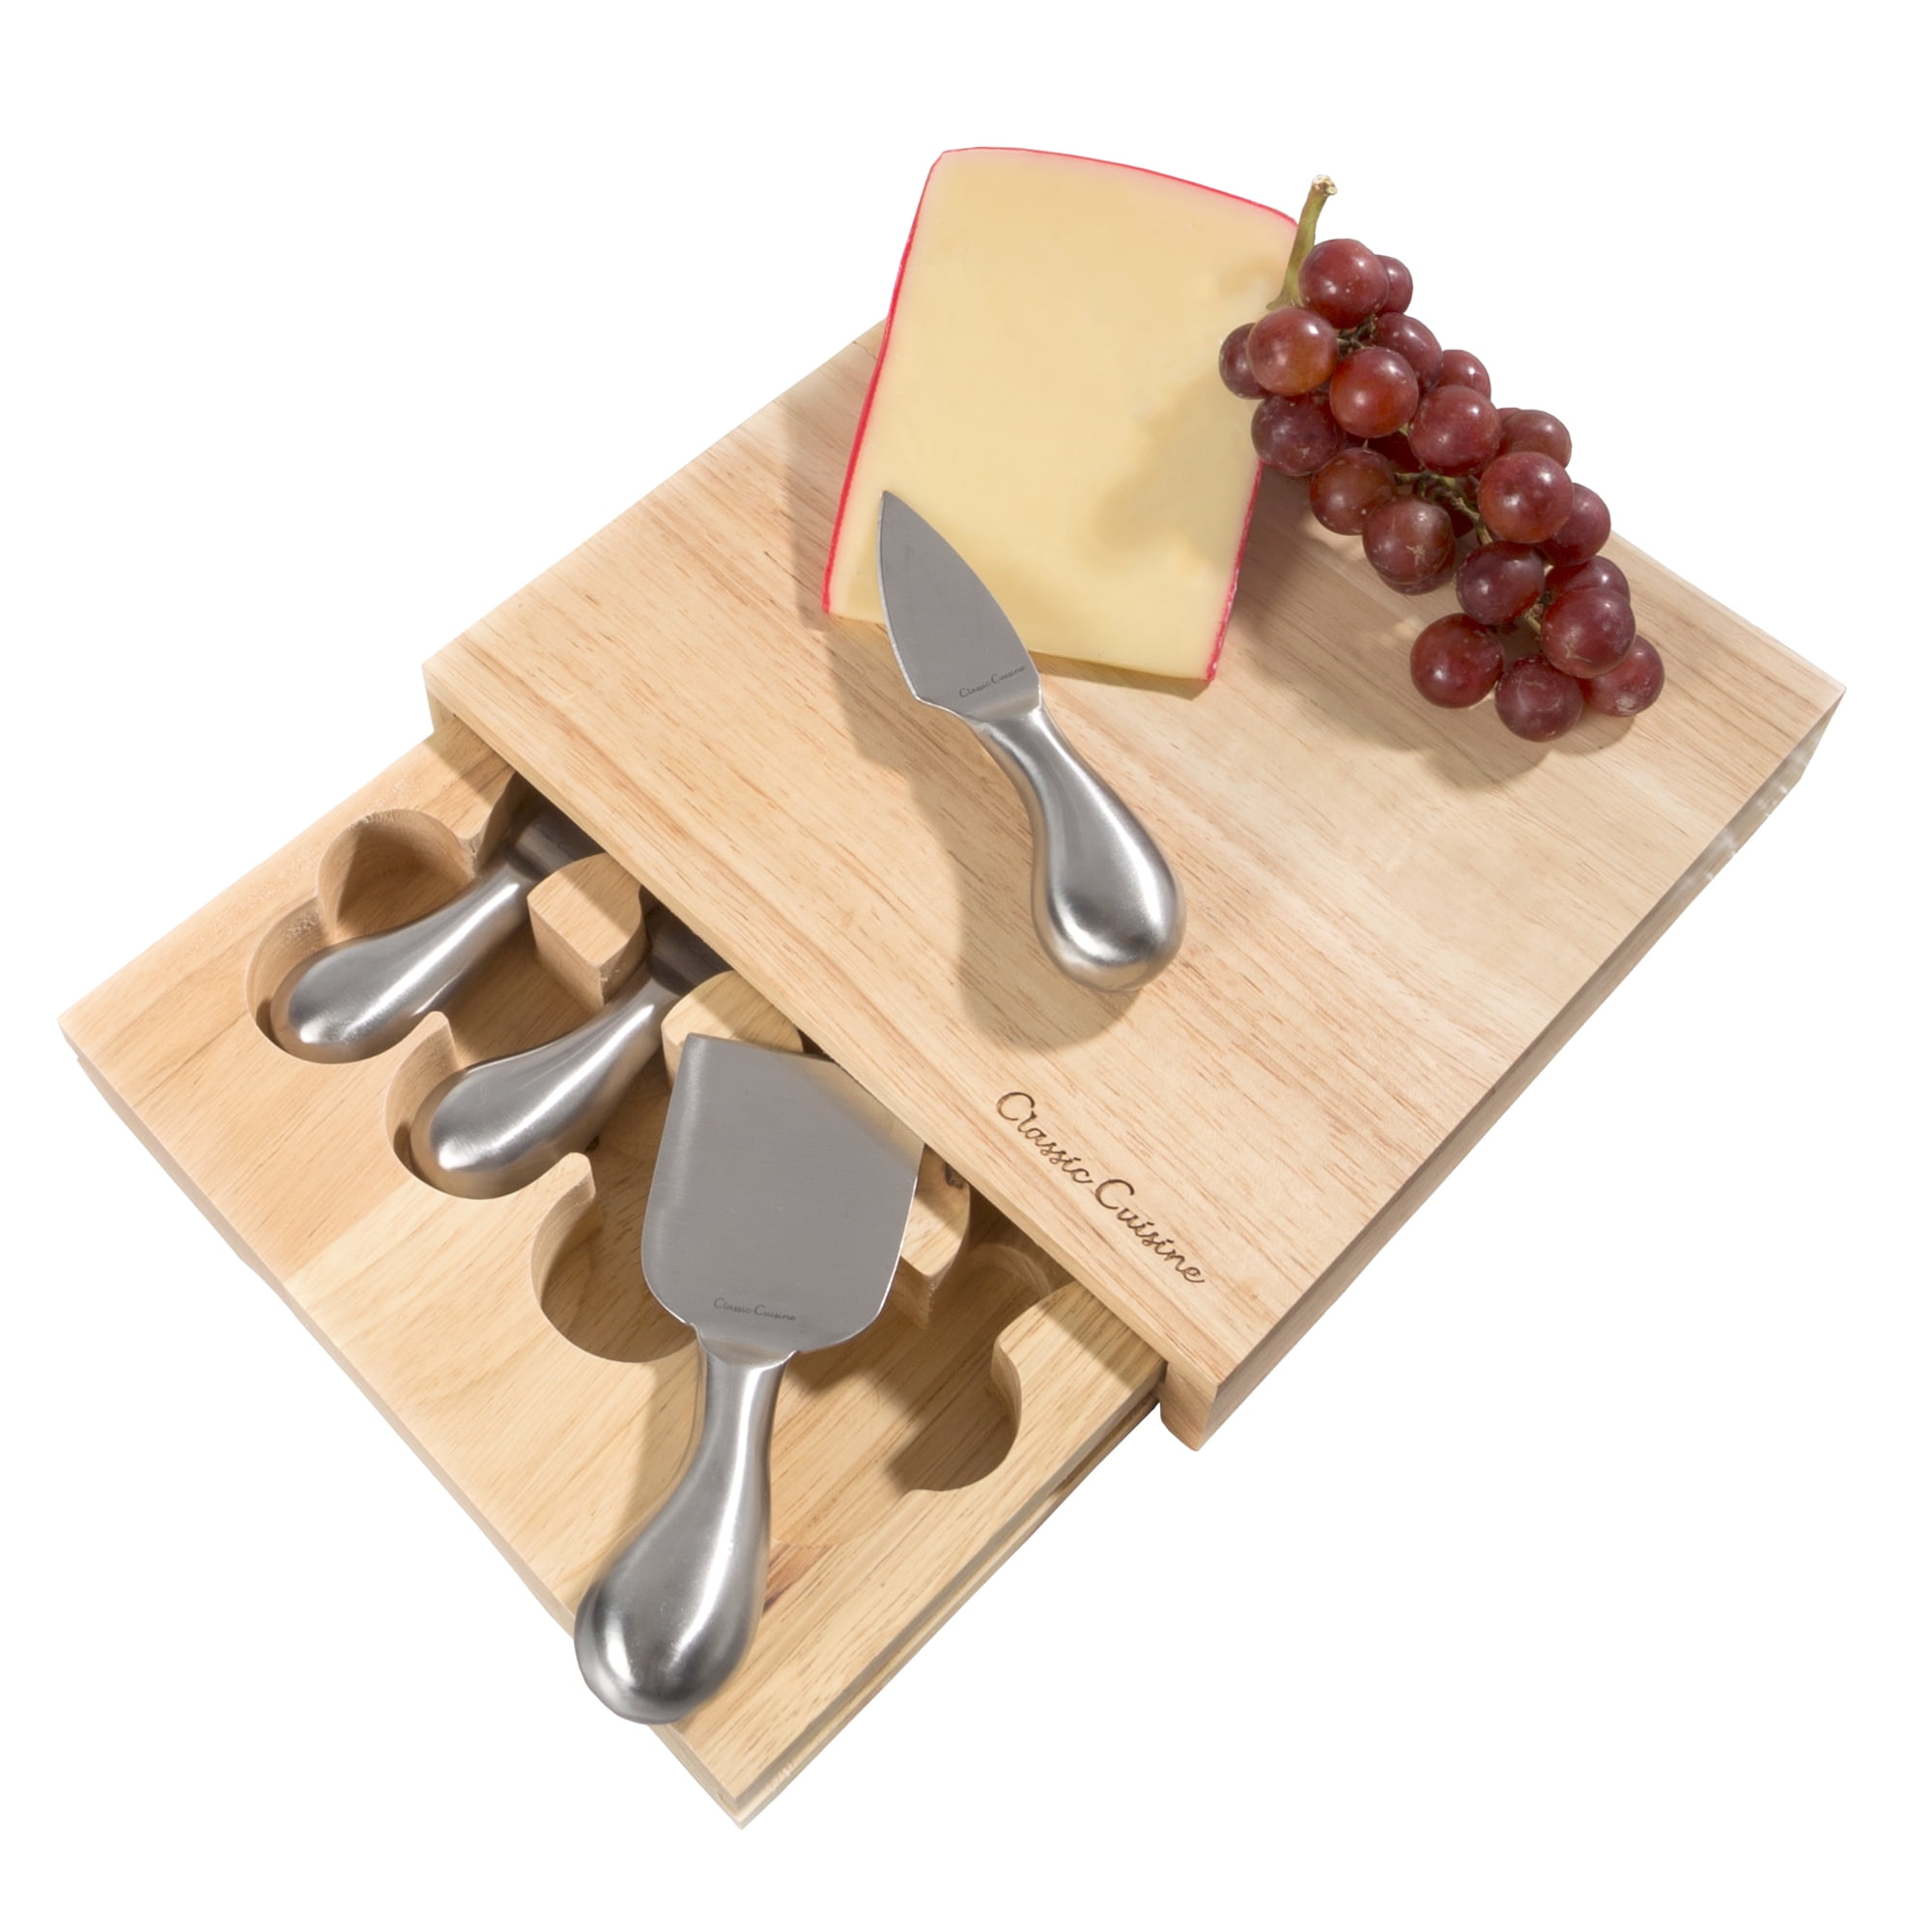 Certified International Sweet as a Bee Cheese Board with Knife Set,  13.25-inch Length, For Everyday Use, Kitchen Accessories, Party Celebration